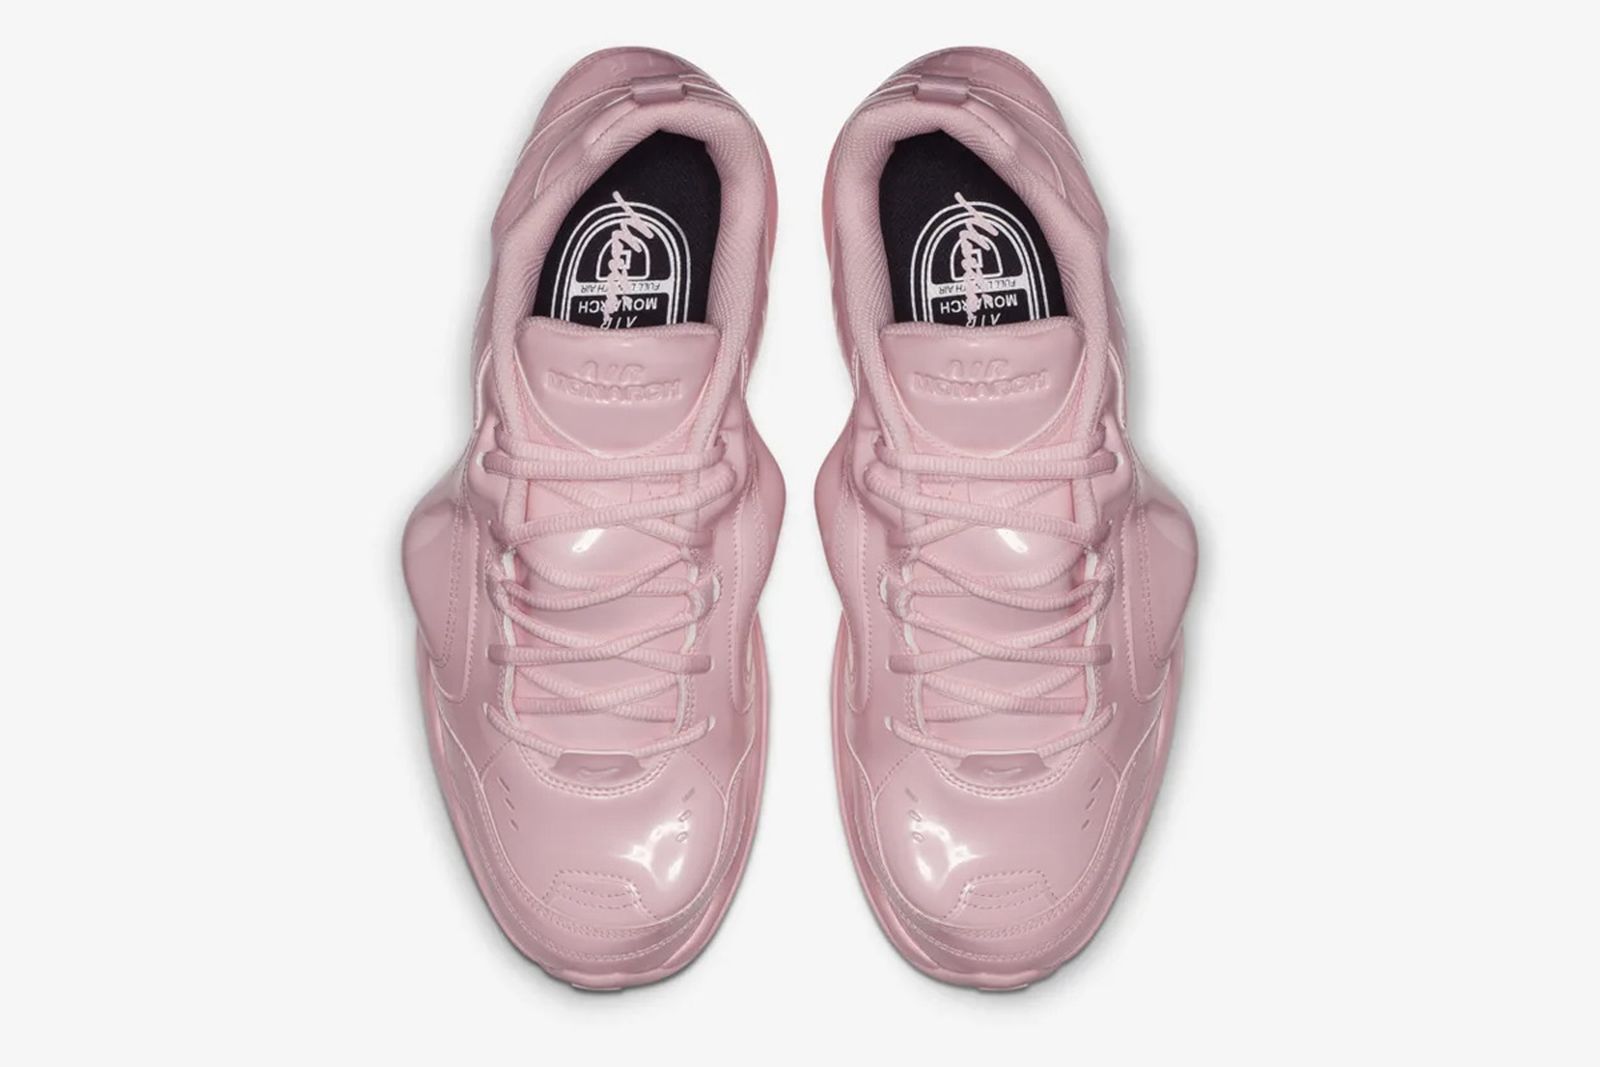 Martine Rose x Nike Air Monarch: Official Release